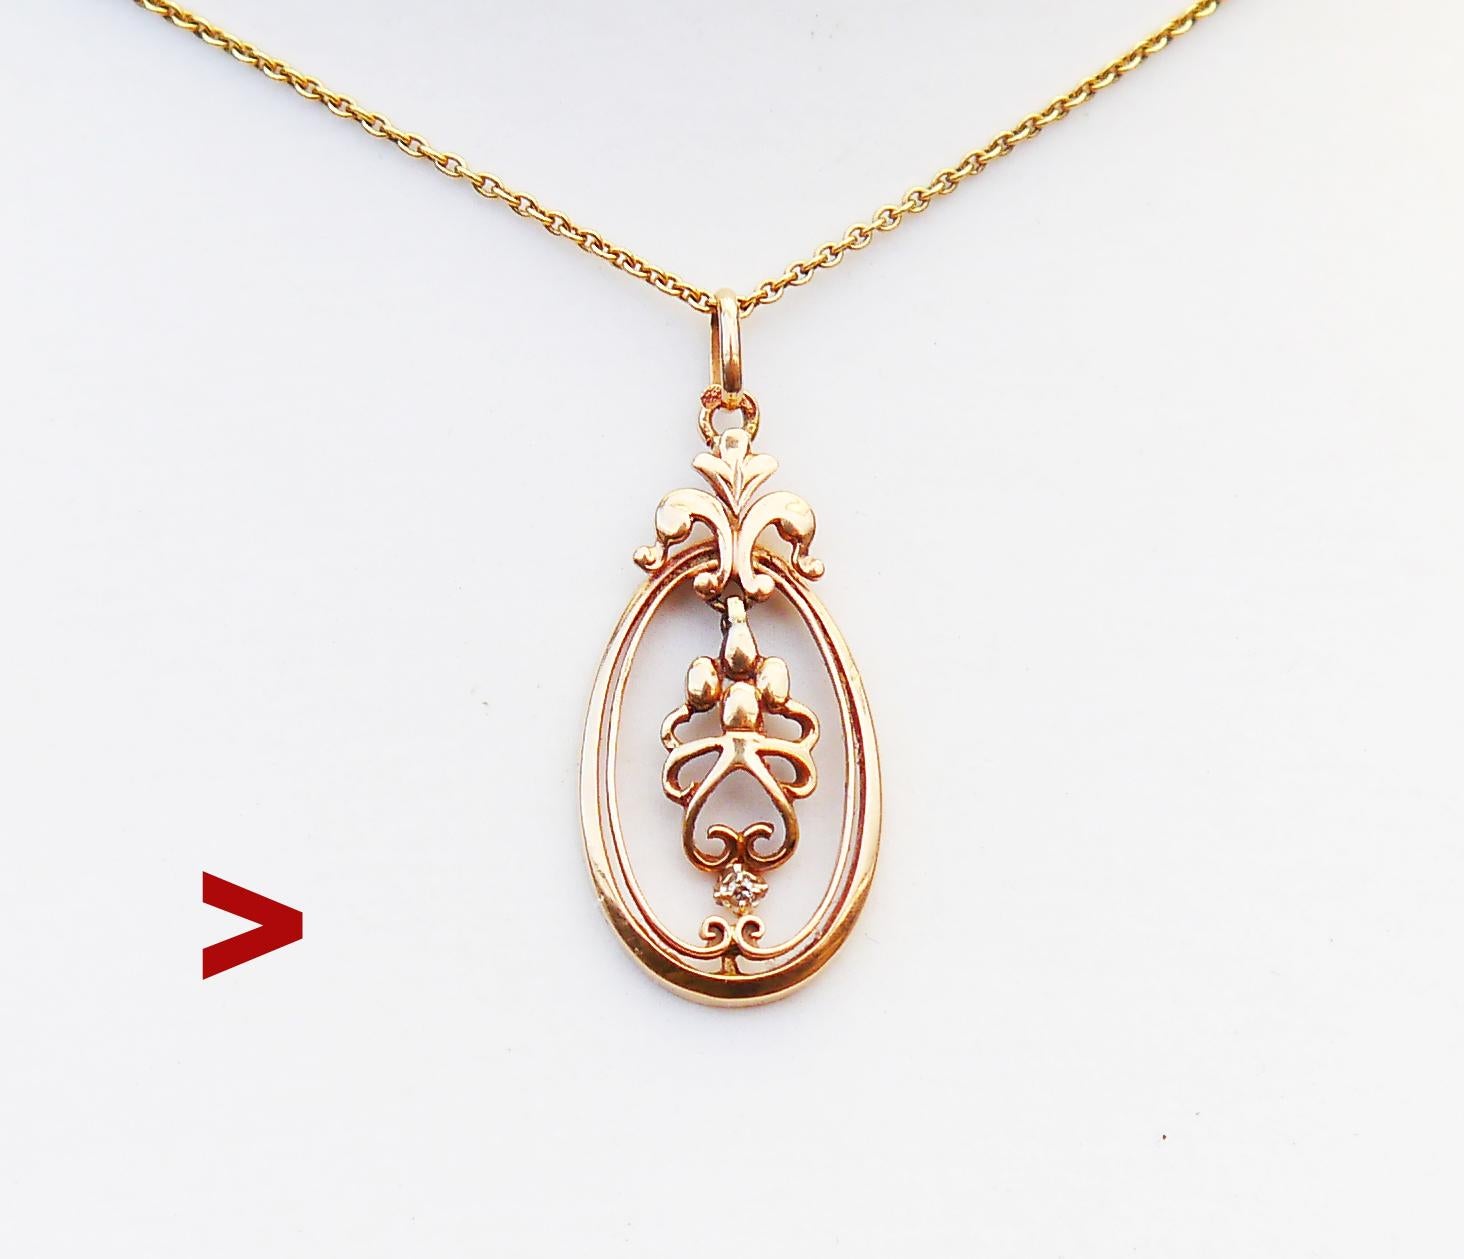 Antique German ca. 1920s -1940s pendant made of solid 18K Rose Gold. The inner pendant with a small diamond is suspended, mobile, and can be turned to any side. Hallmarked 756, marks of maker.

Measures 30 mm long including the bail x 13 mm wide.